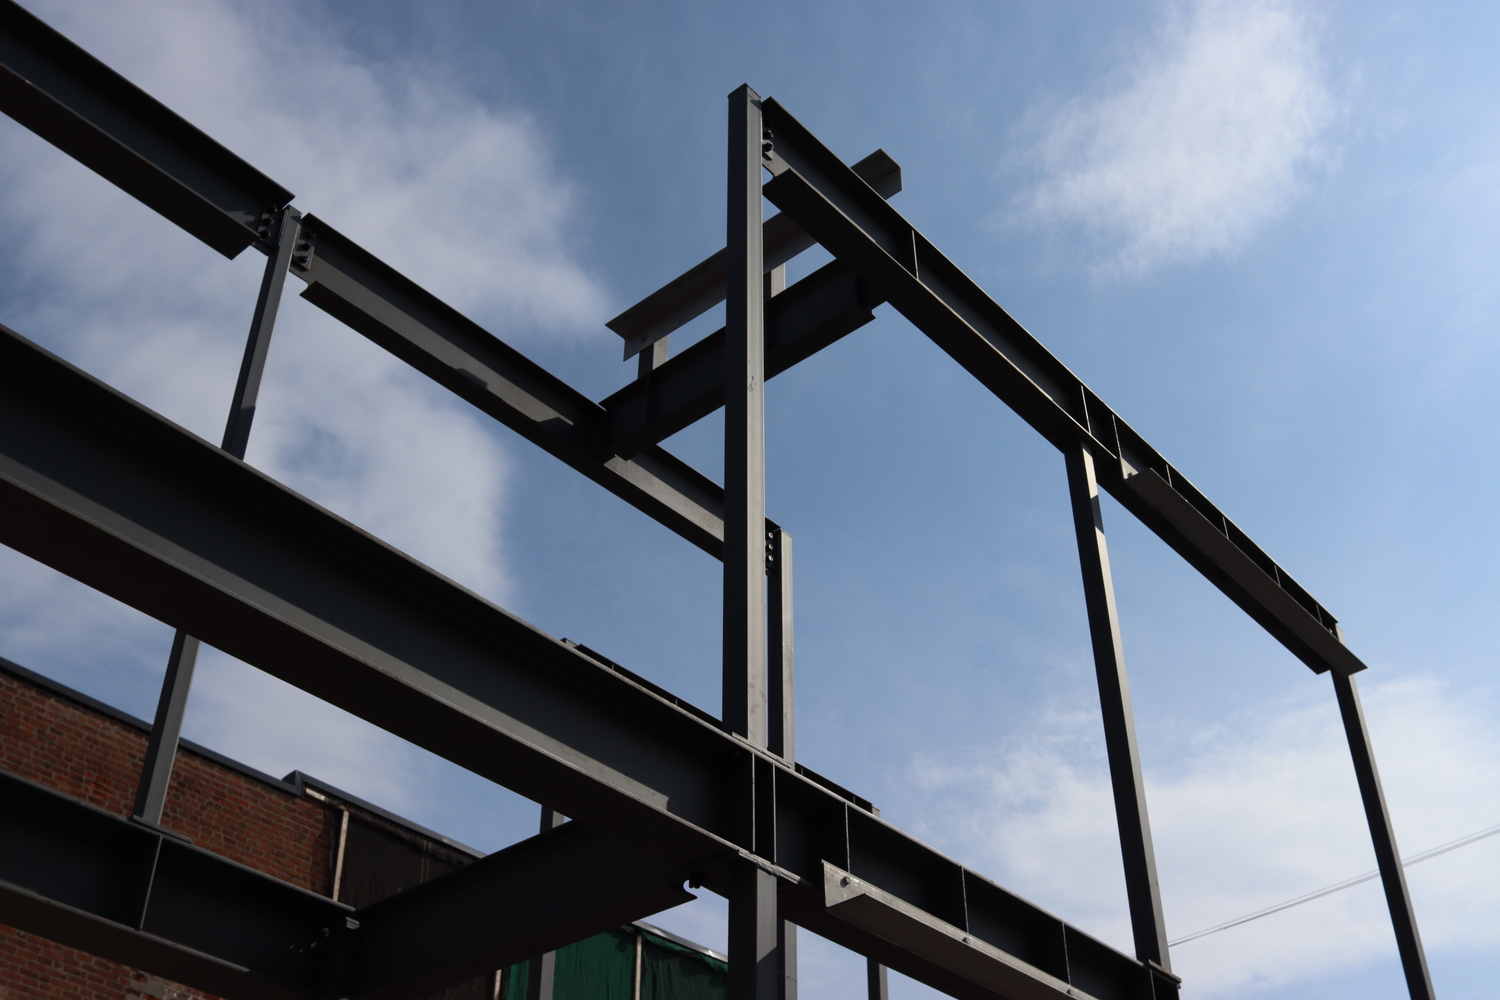 grey steel beams of a building in early construction
on a background of blue sky with some light clouds.
the beams are intersecting at odd points,
implying the final building will not be a simple box.
the sun casts dark shadows into the interiors
of the I-shaped metal.